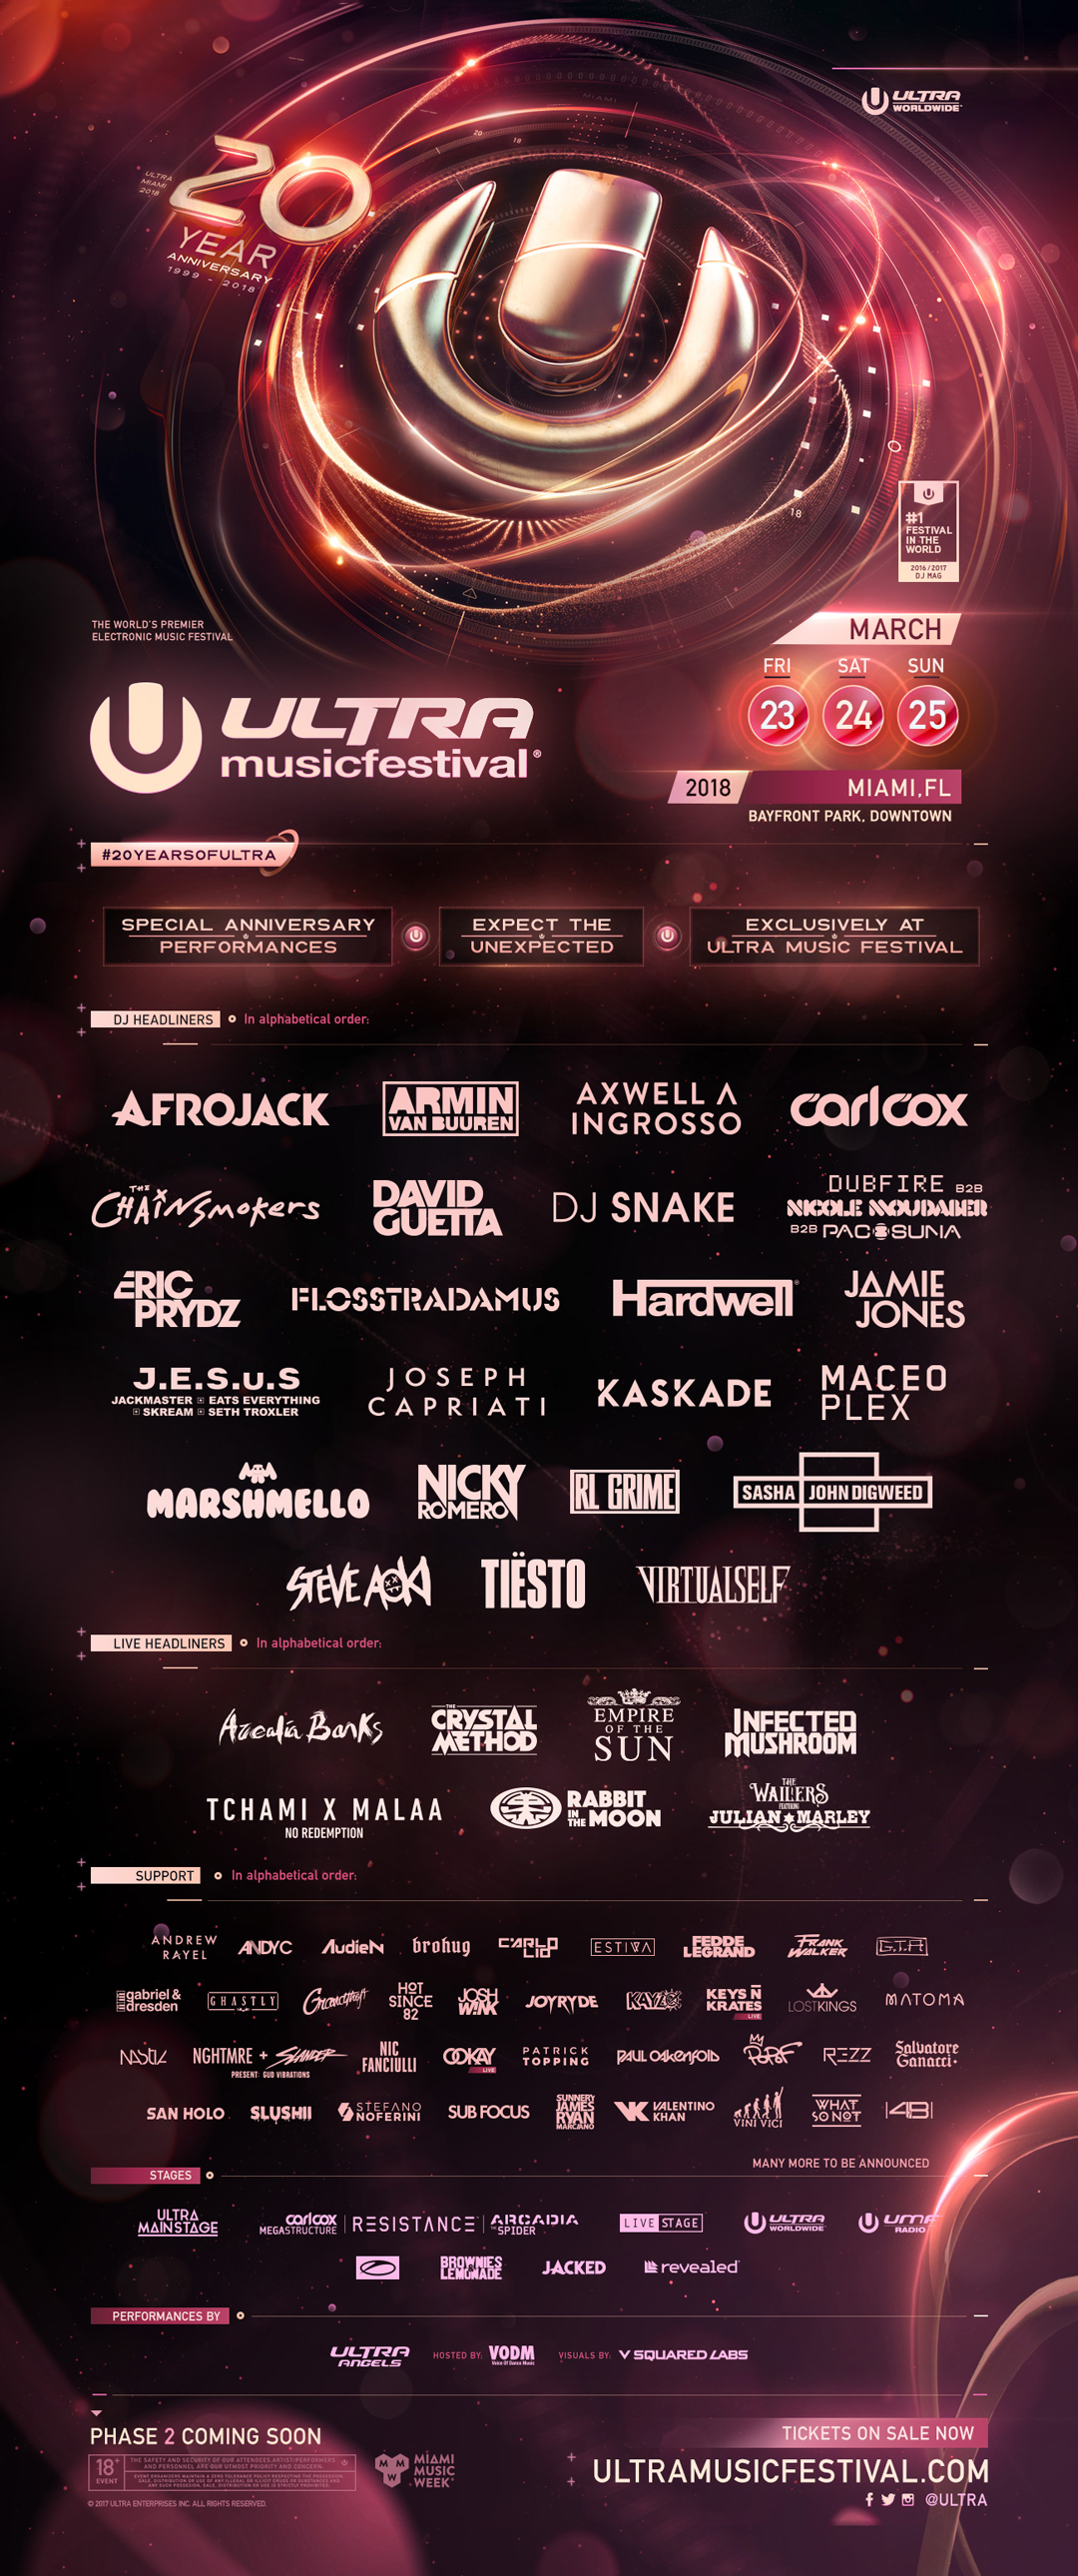 ultra-miami-lineup-phase1-2018-backstages